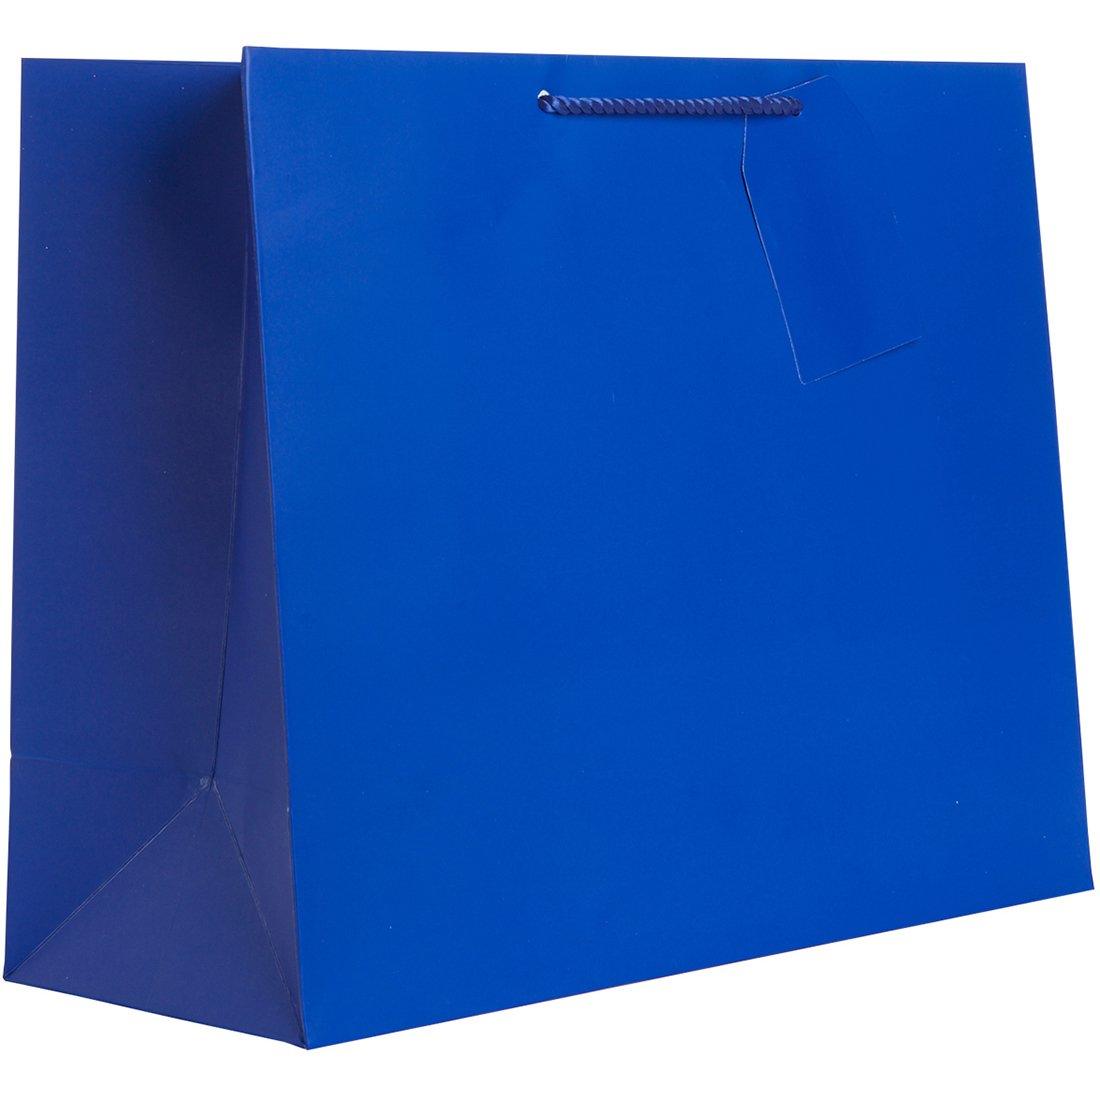 Heavyweight Solid Color Large Jumbo Gift Bags, Matte Royal Blue by Present Paper - Vysn